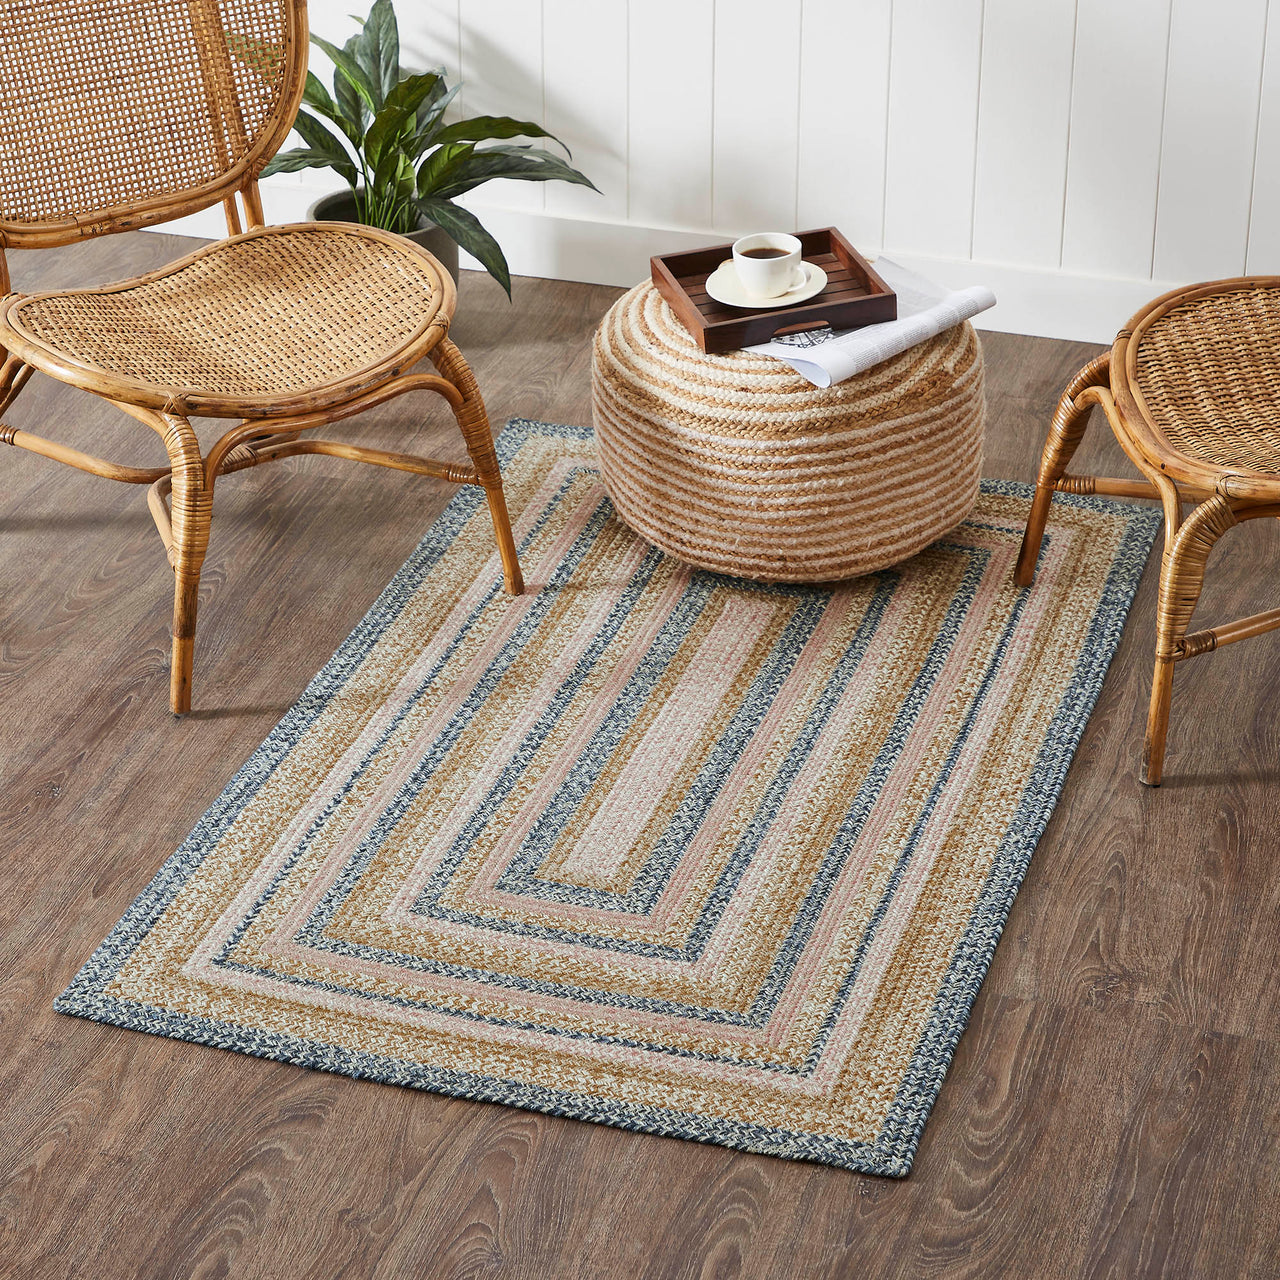 Kaila Jute Braided Rug Rect. with Rug Pad 36"x60" (3'x5') VHC Brands